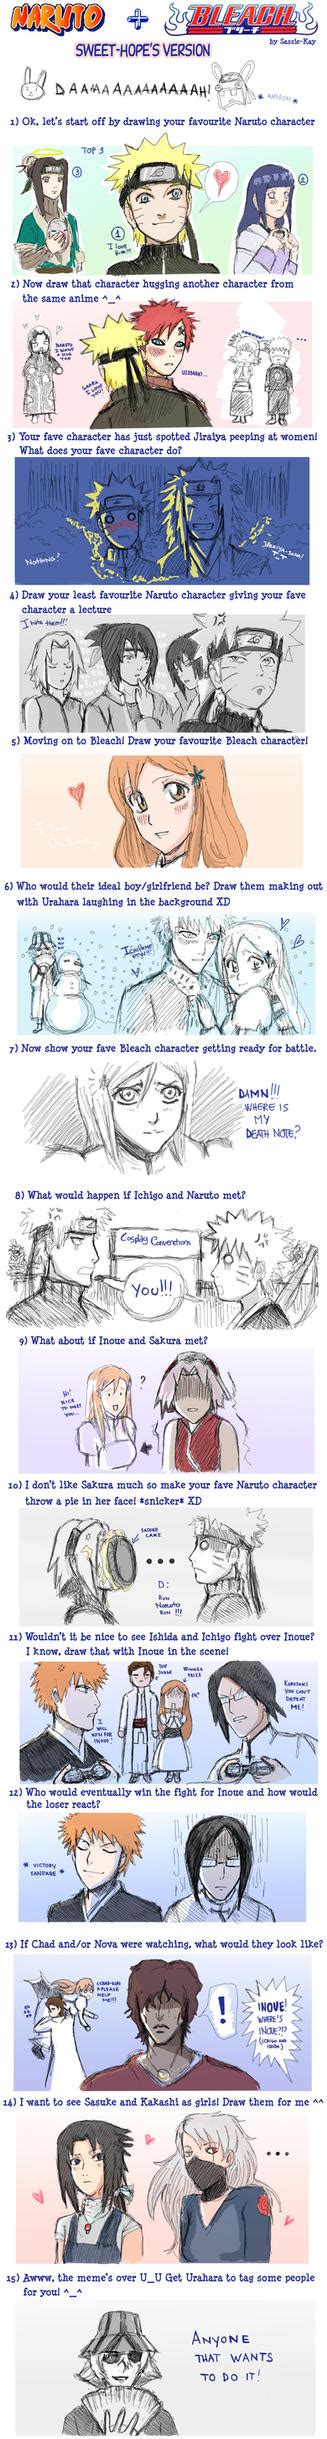 Naruto And Bleach Meme By Sweet Hope On Deviantart